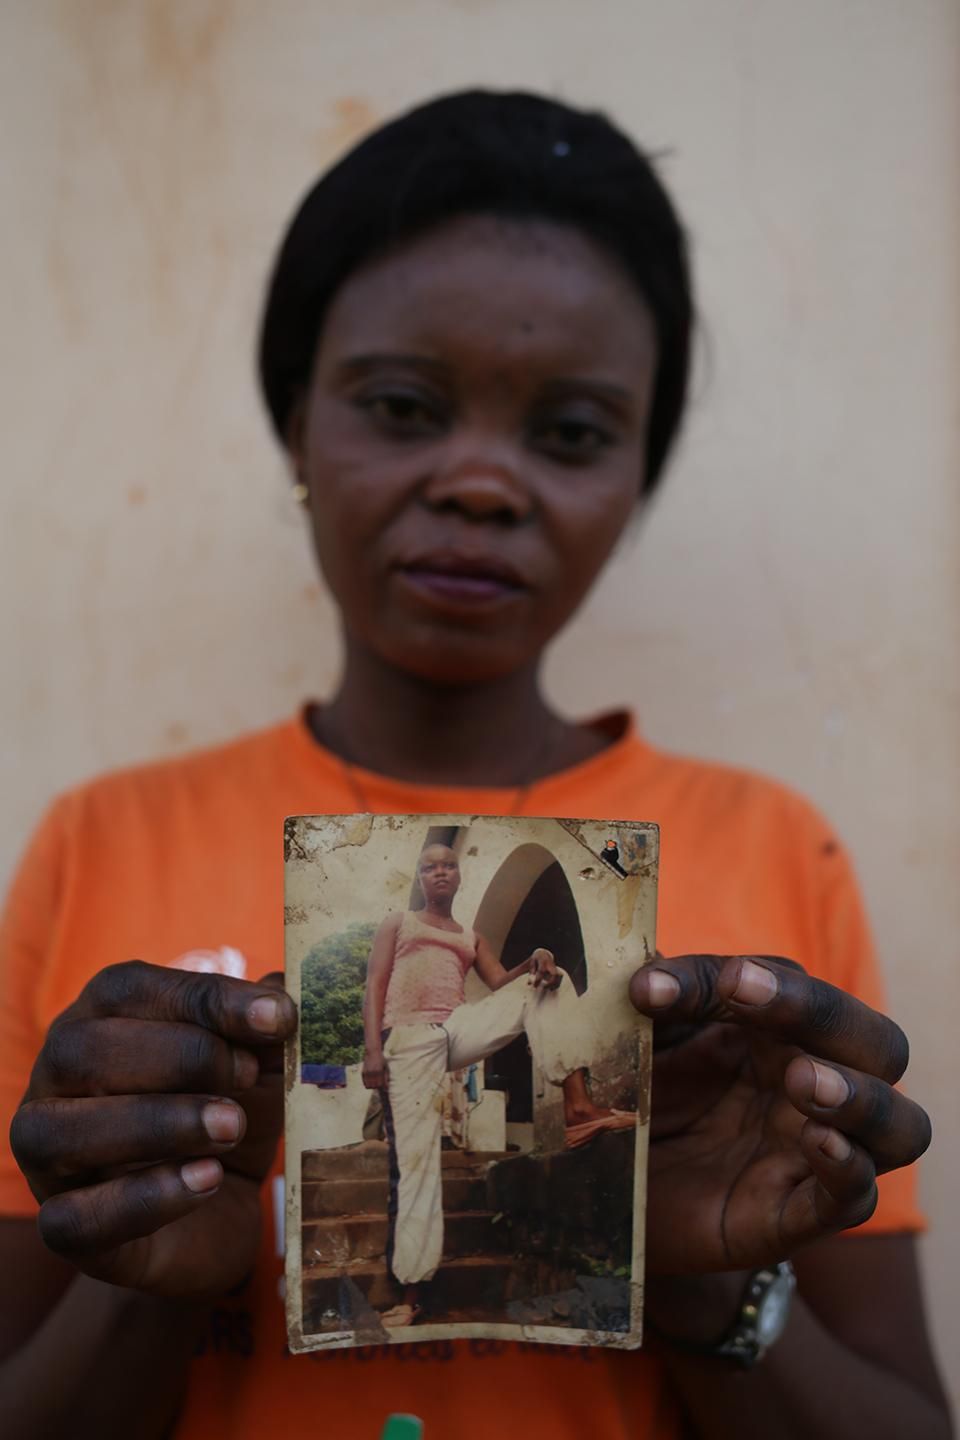 Larissa shows an undated photo of herself with her head shaved for Séléka training. “There were many, many women,” she explained in Bangui on September 24. “They taught us how to hold and use a gun, how to kill someone and how to take over other people’s belongings.” Image by Cassandra Vinograd. Central African Republic, 2017.